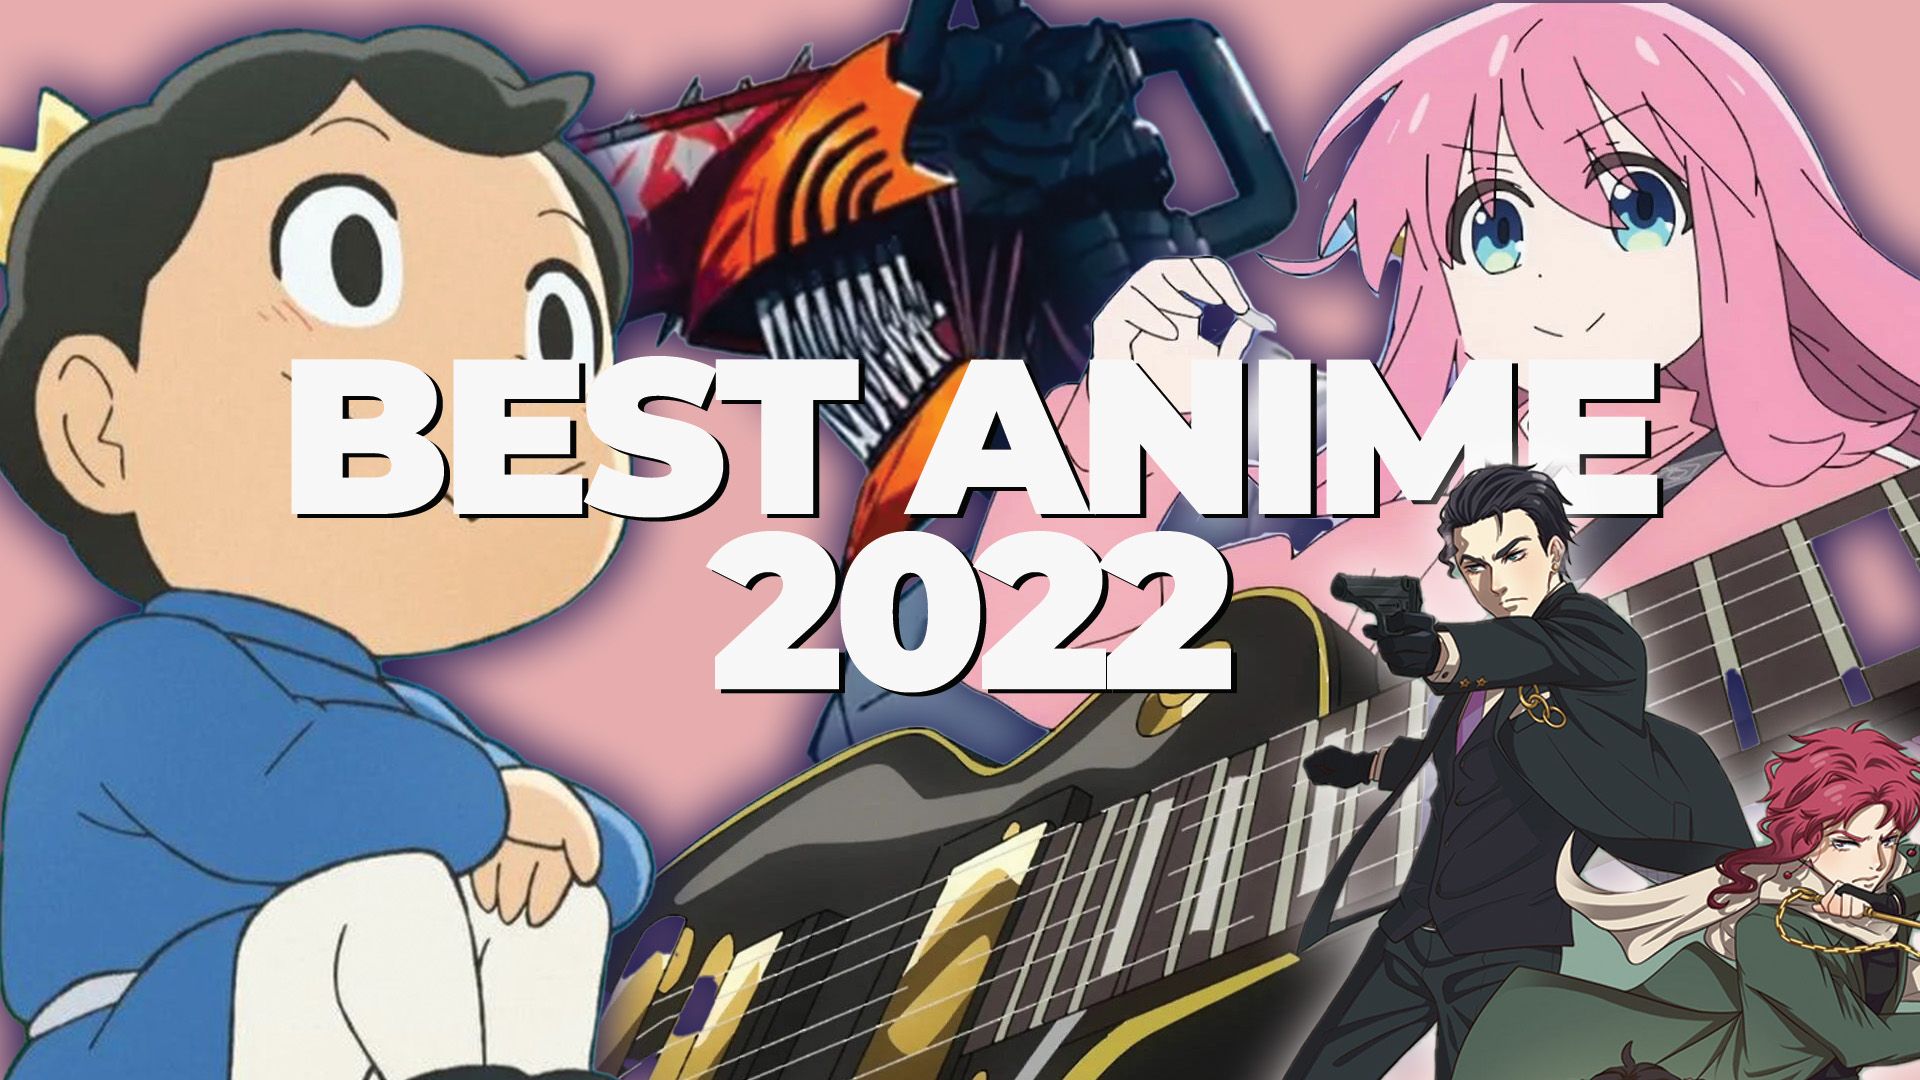 The Best Anime Artists of All Time